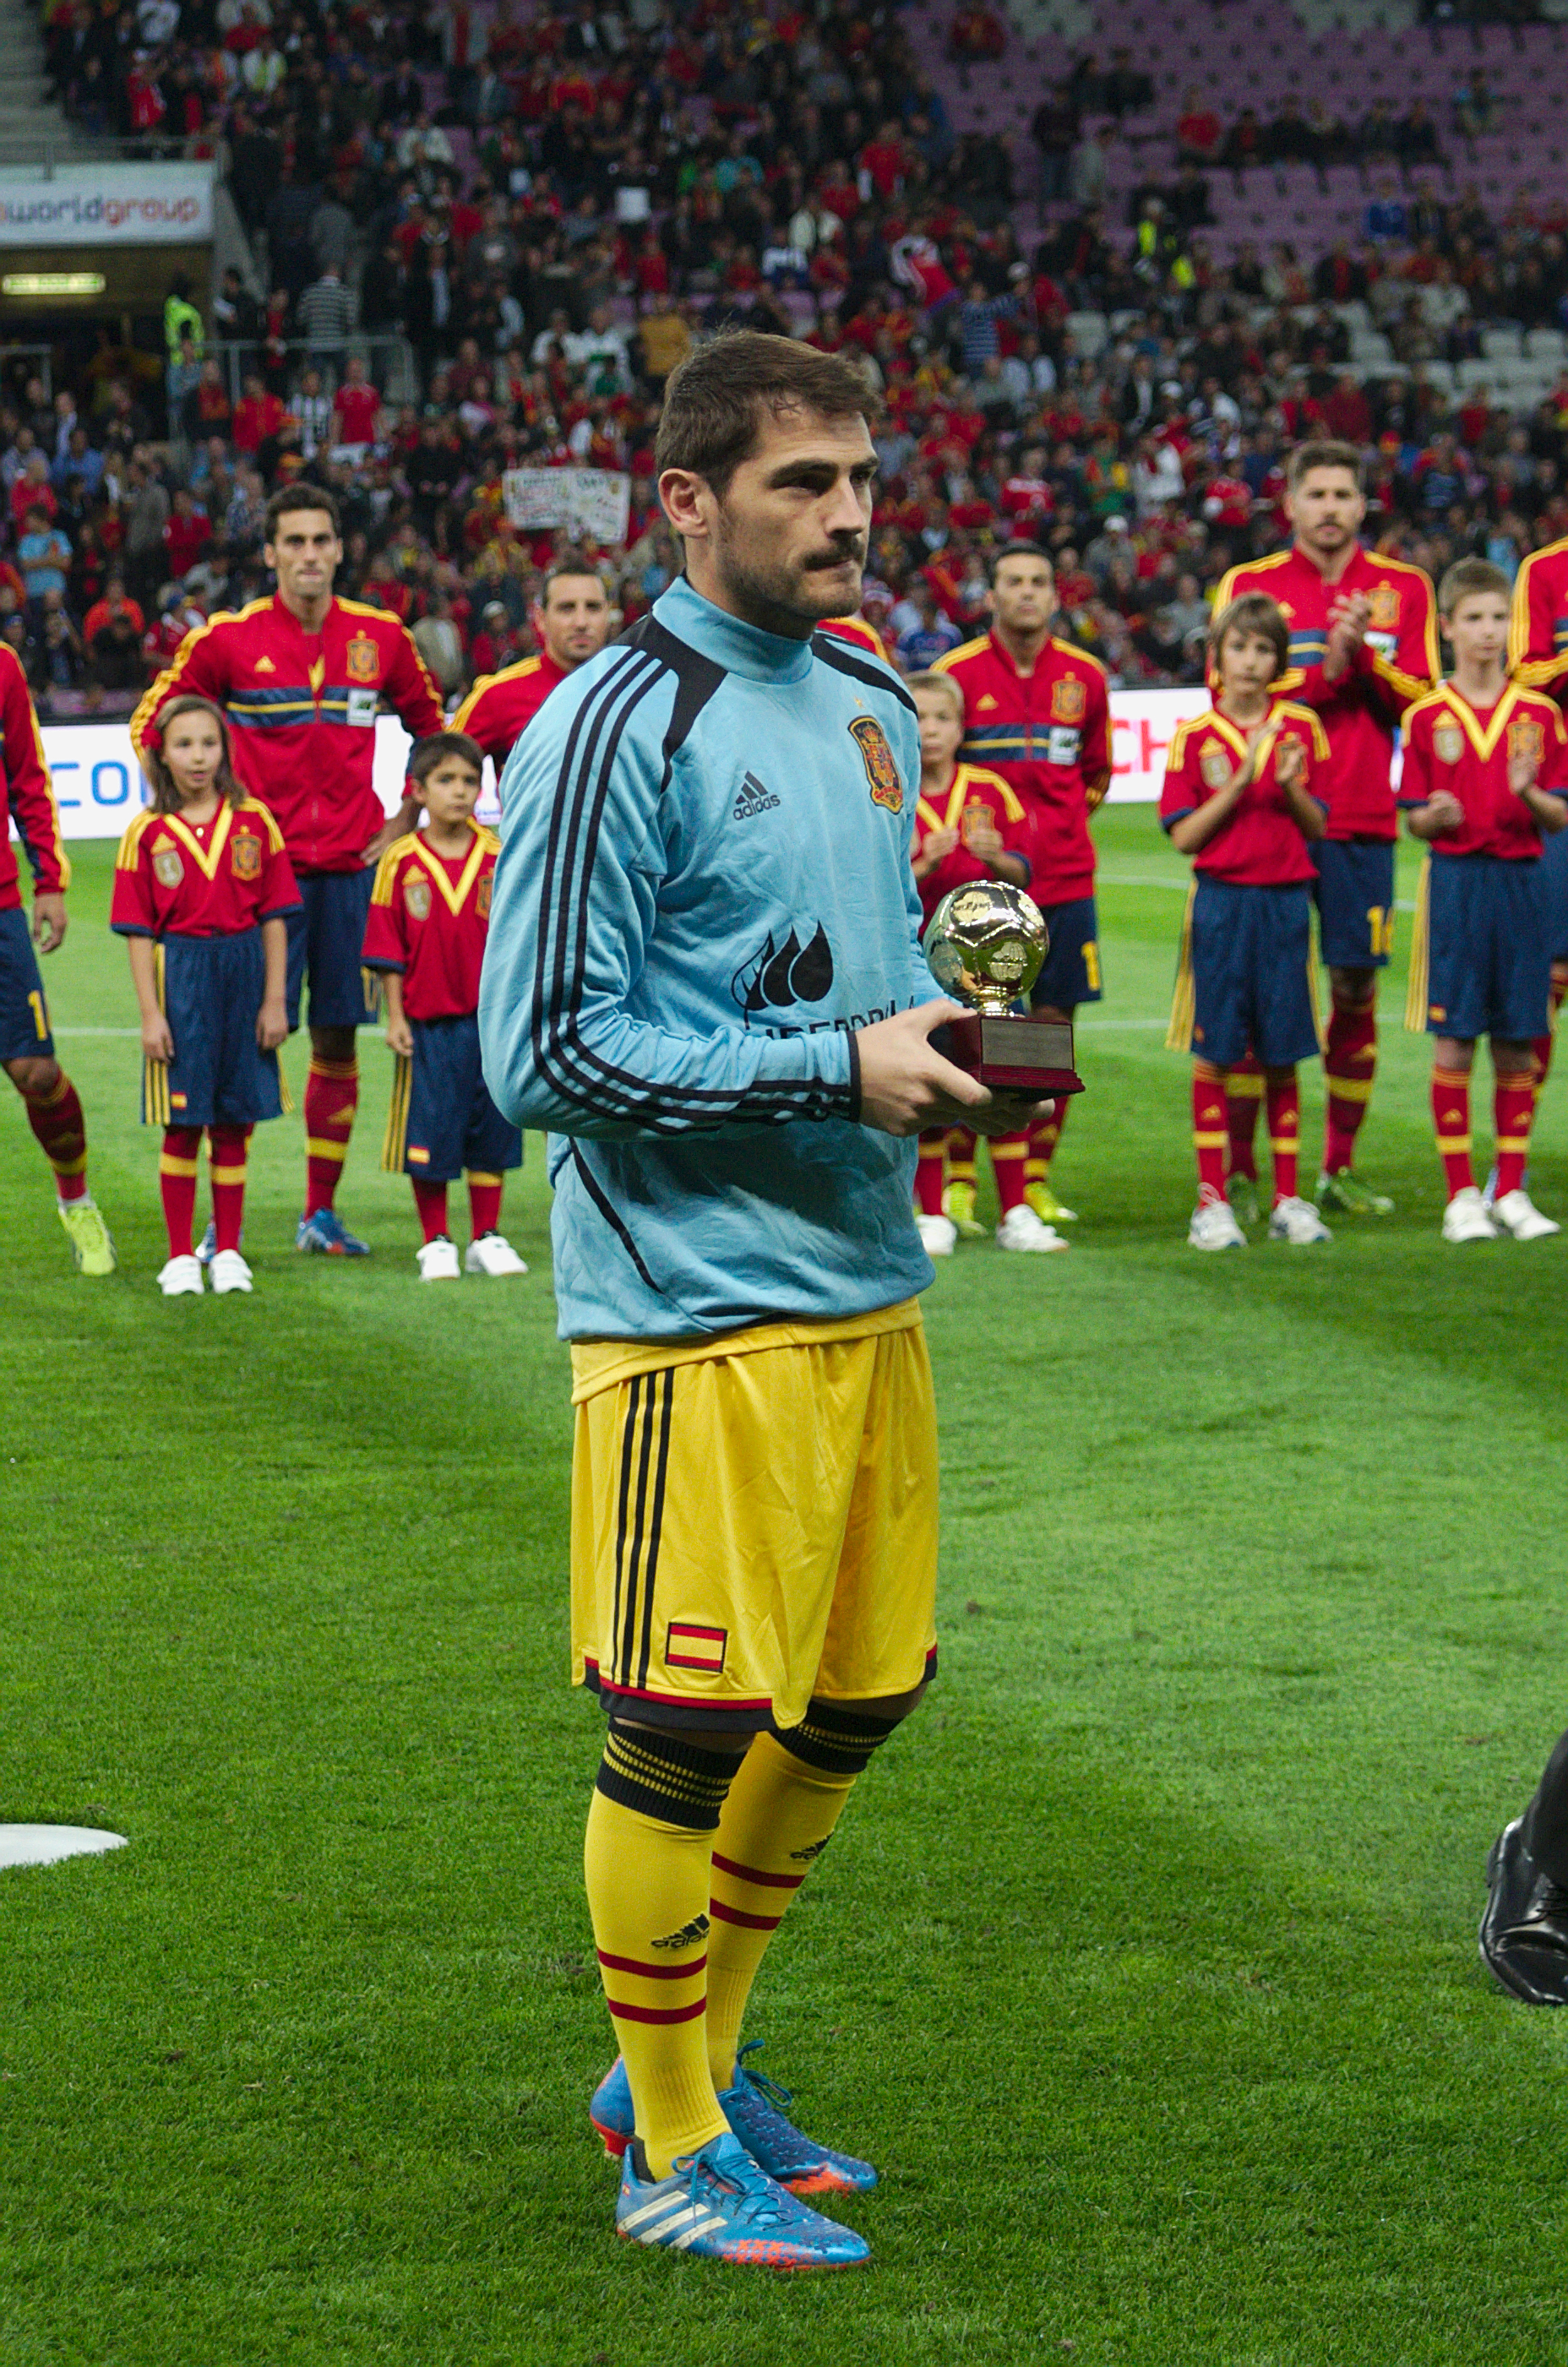 Will De Gea Replace Casillas at Real Madrid?